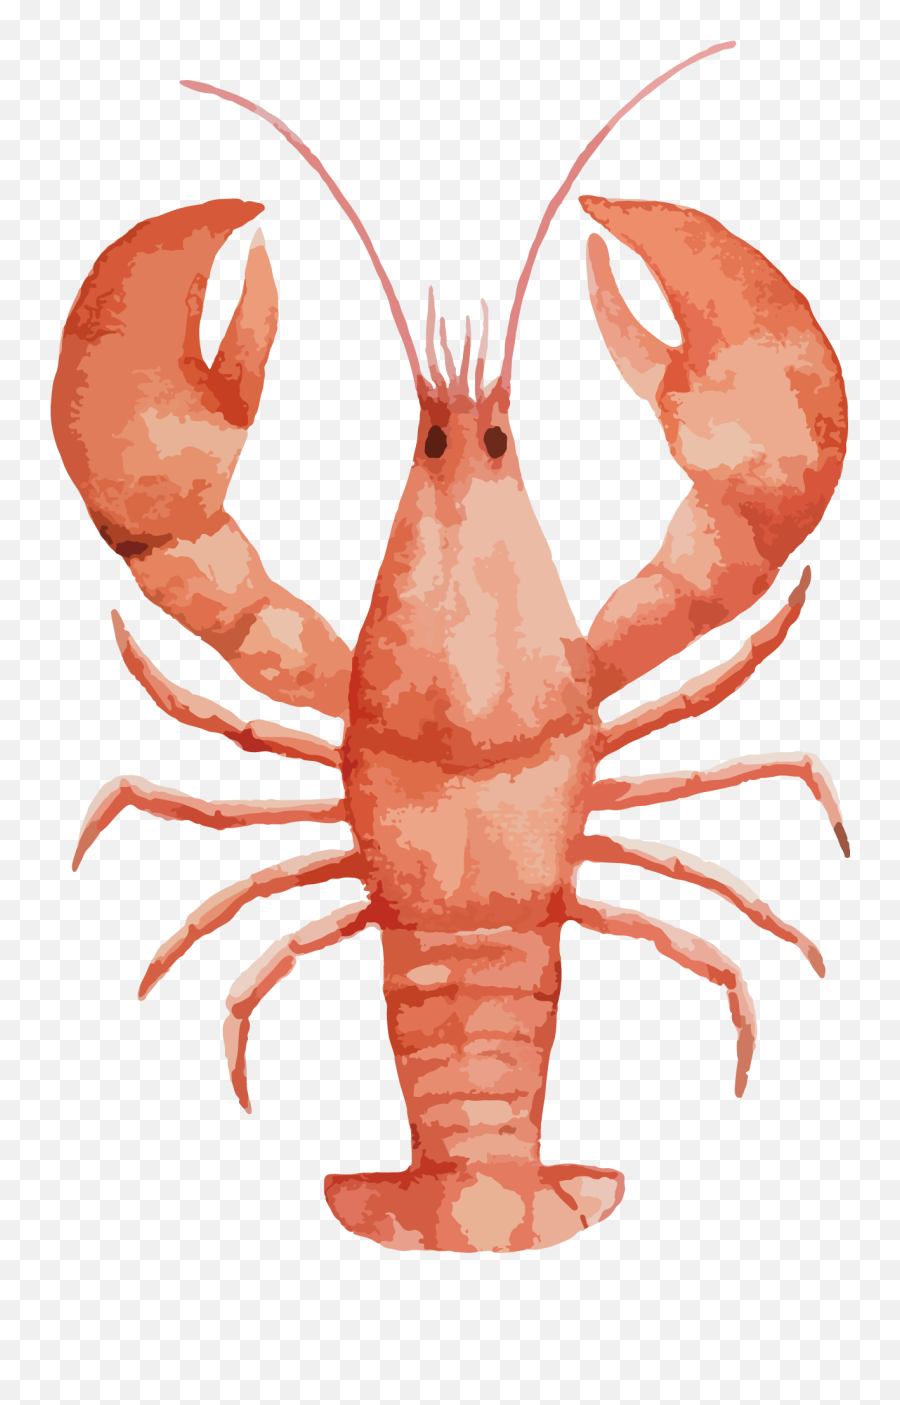 Lobster Watercolor Painting Seafood Painted Large Transprent - Watercolor Lobster Png Emoji,Crawfish Clipart